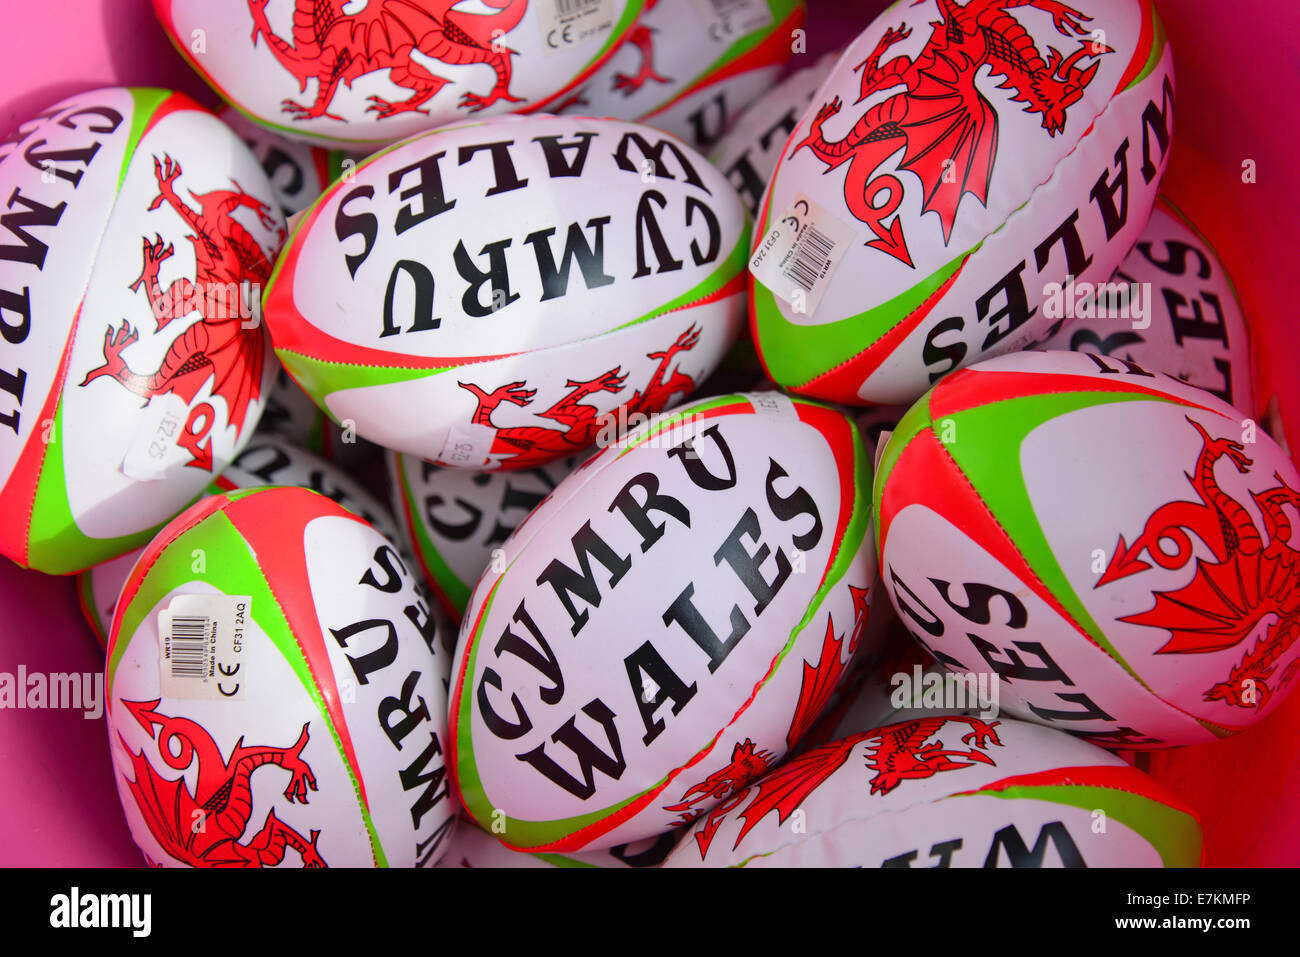 Welsh souvenir rugby balls, Conwy, Conwy County Borough, Wales, United Kingdom Stock Photo